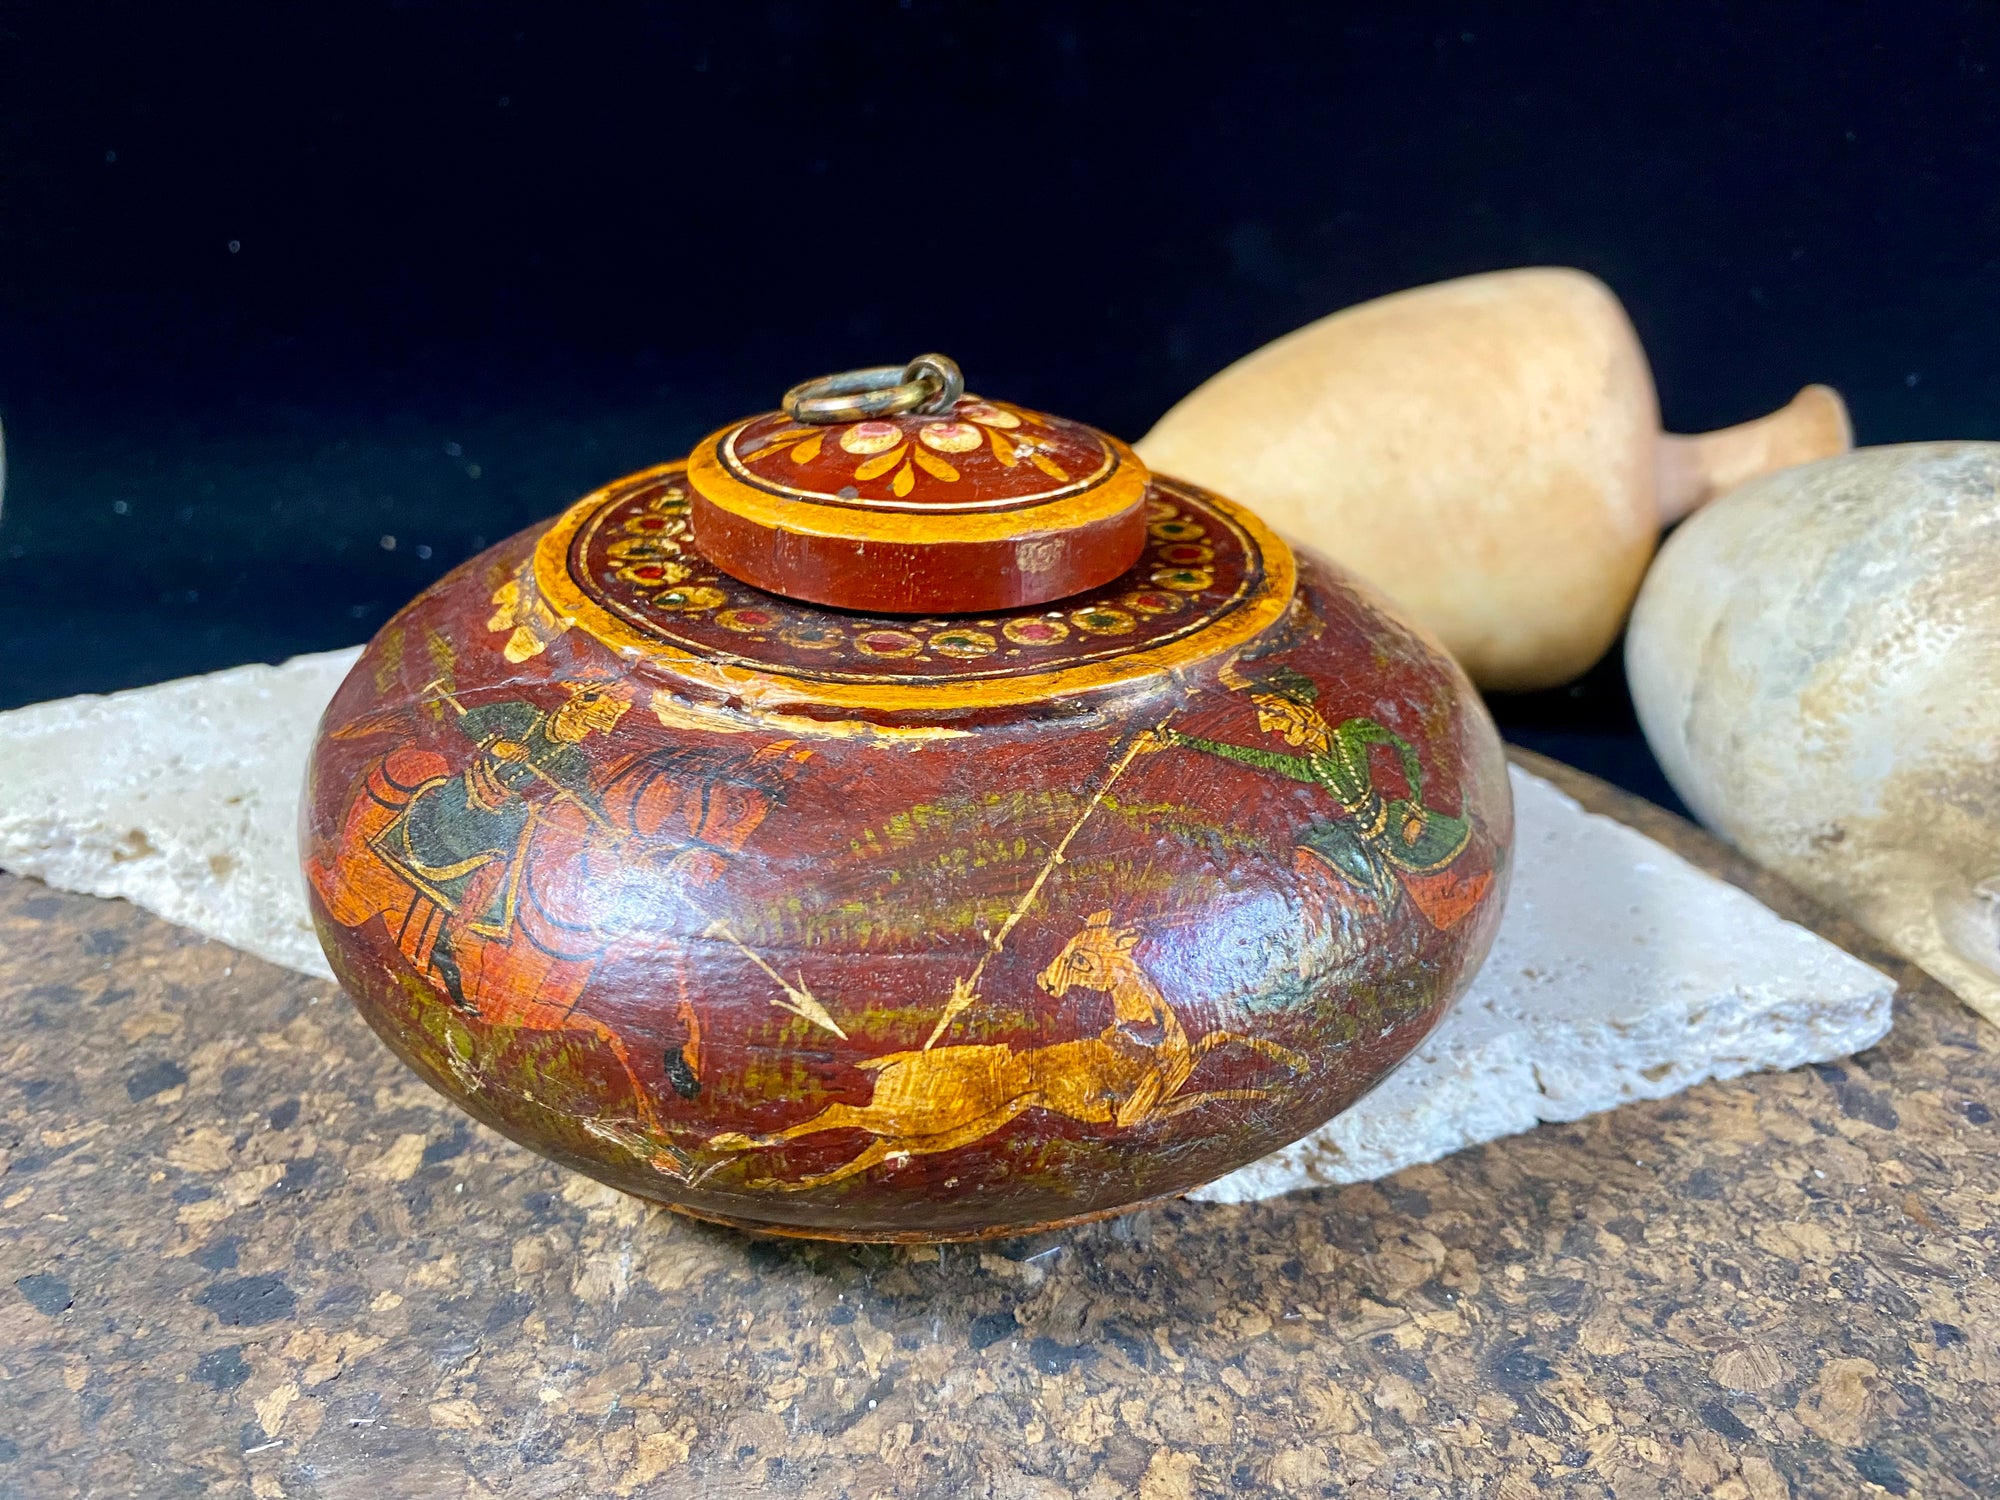 A beautiful low oval lidded bowl or box, traditionally called an opium pot because of its shape. Crafted from wood, then hand painted with hunting scenes. Hand made in Rajasthan, India. Measurements: diameter 14.5 cm, height 7 cm.